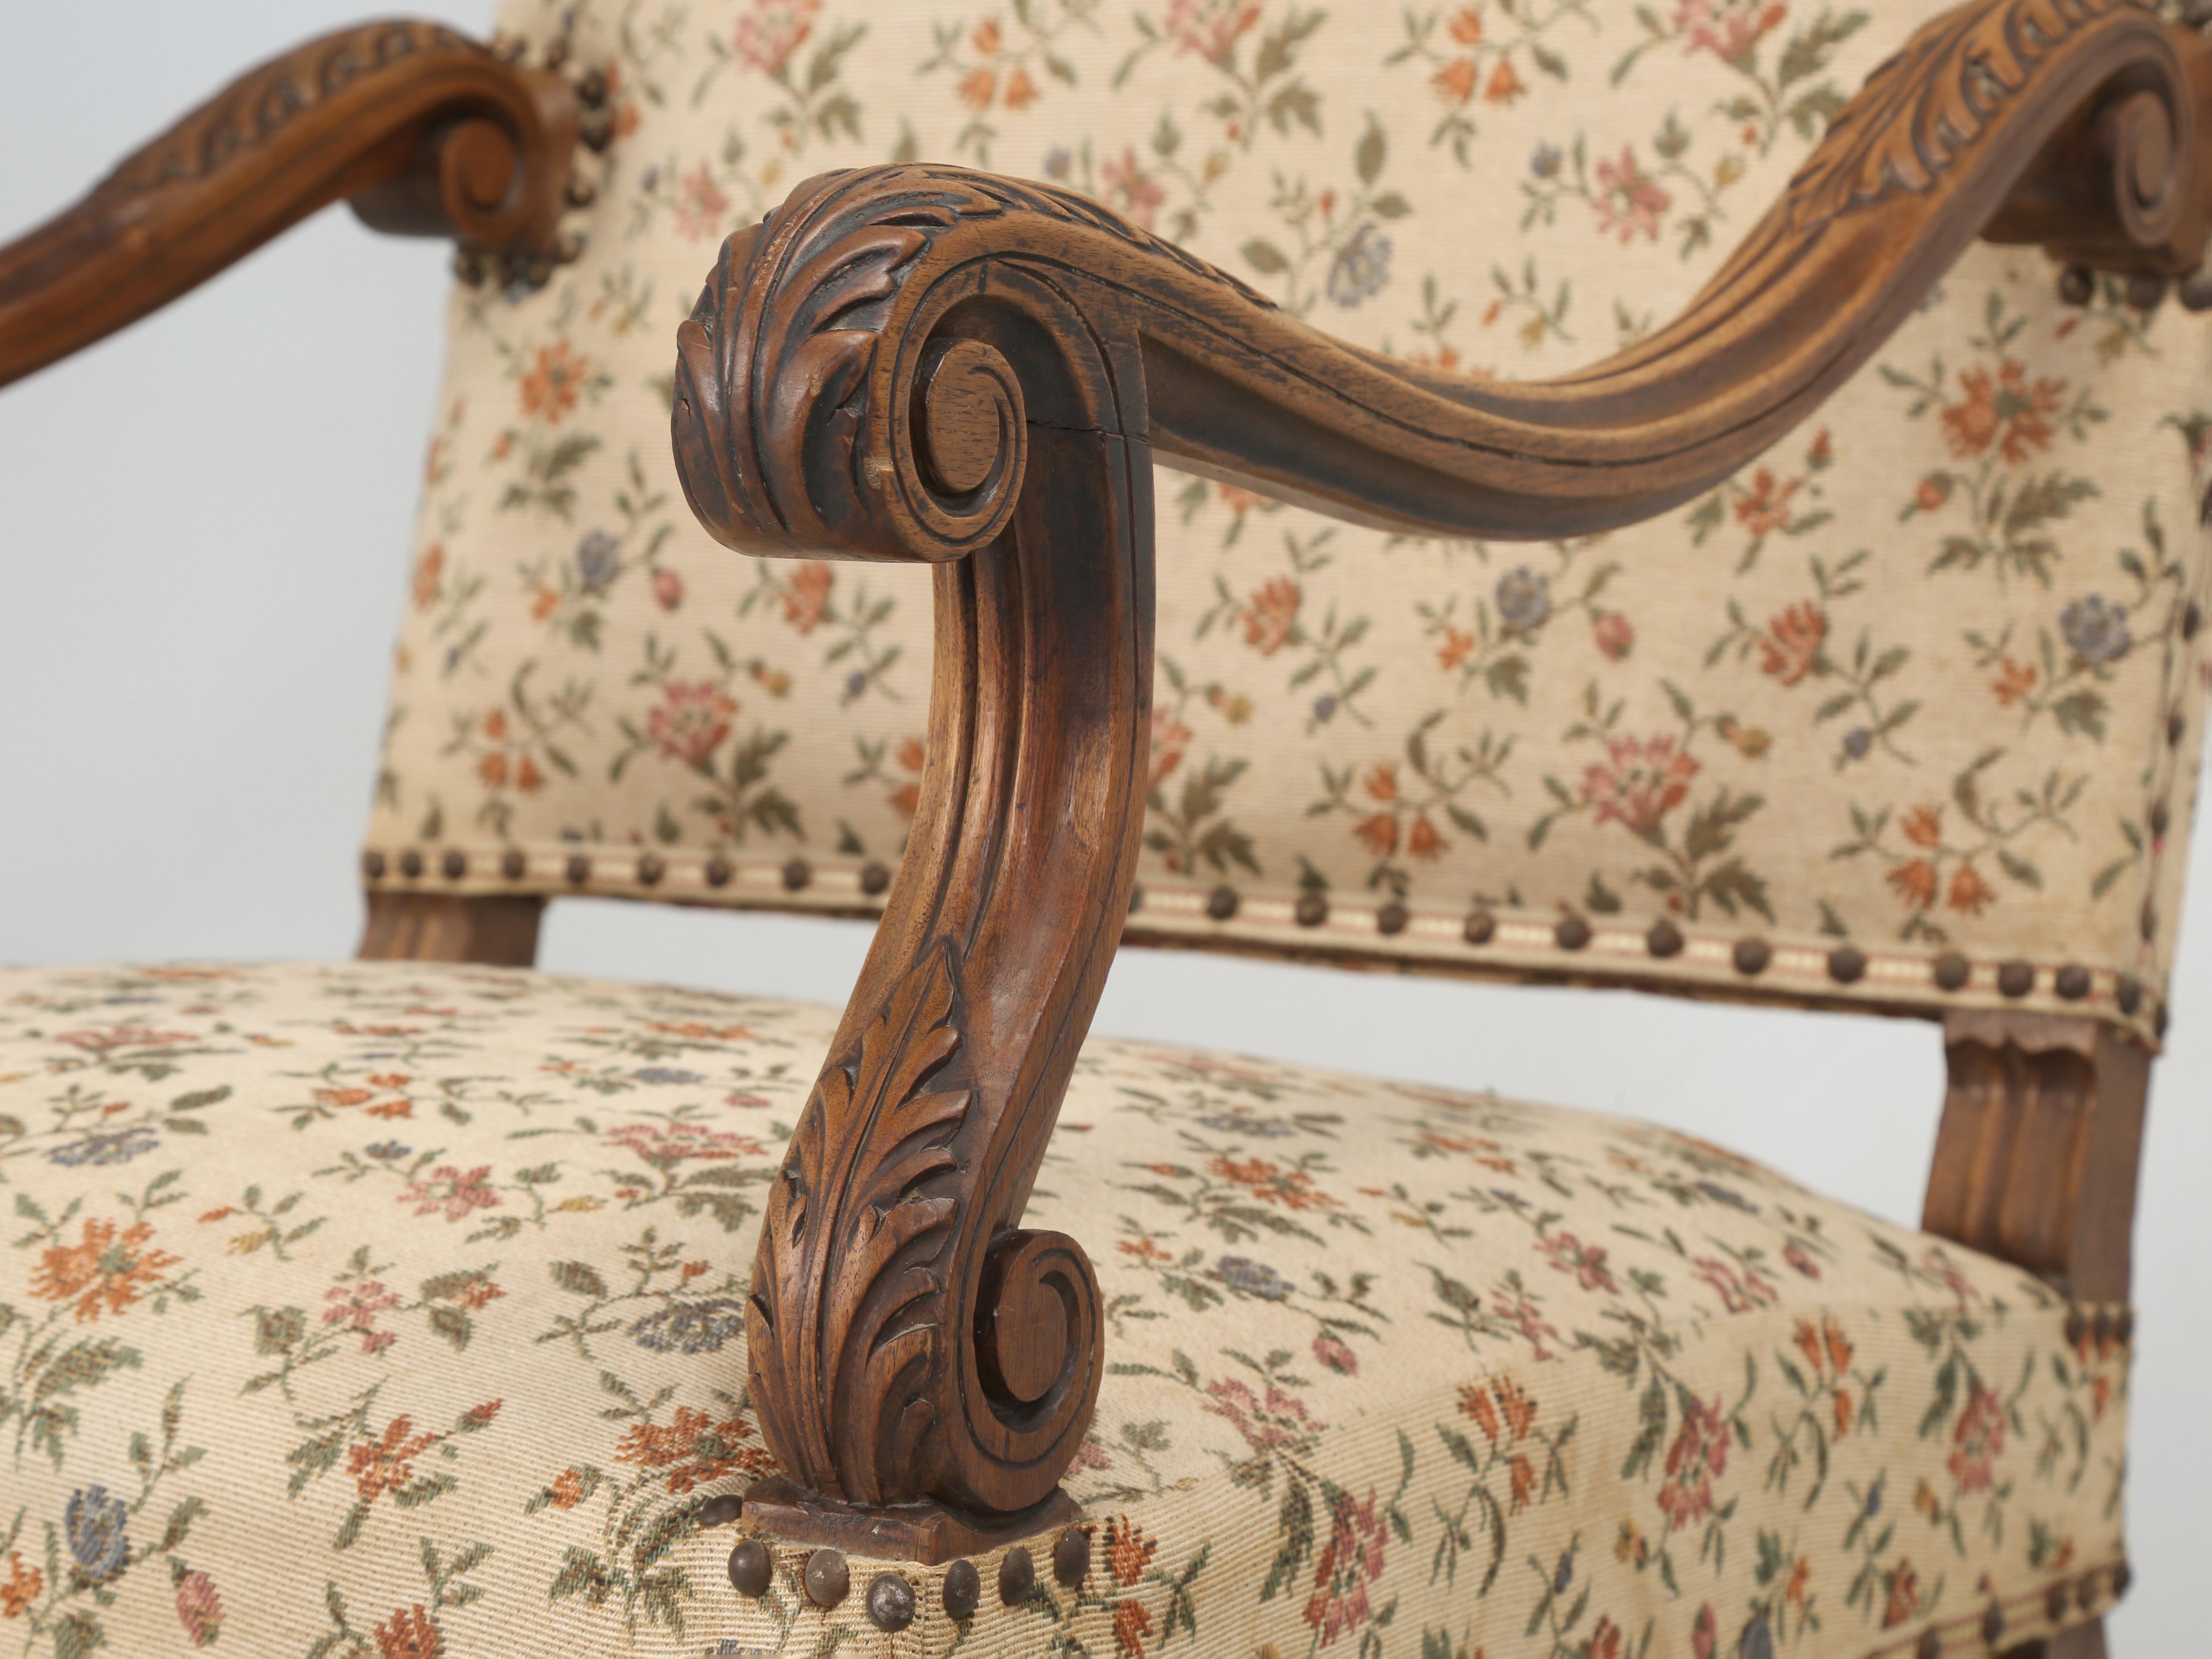 Wood Antique French Walnut Hand Carved Armchair or Throne Chair Unrestored Condition For Sale